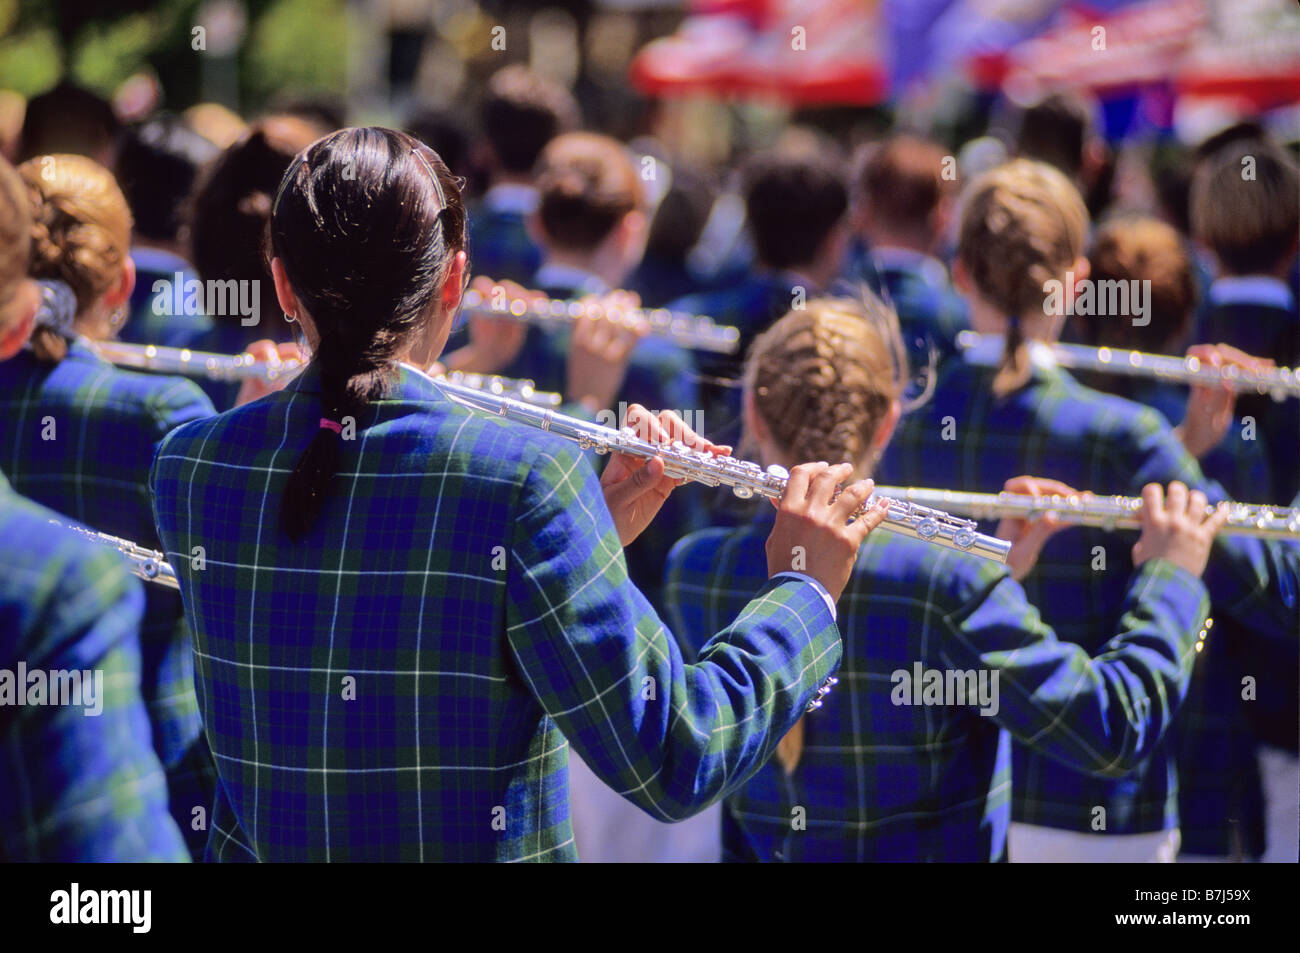 Marching band group from behind, Whistler, BC Canada Stock Photo